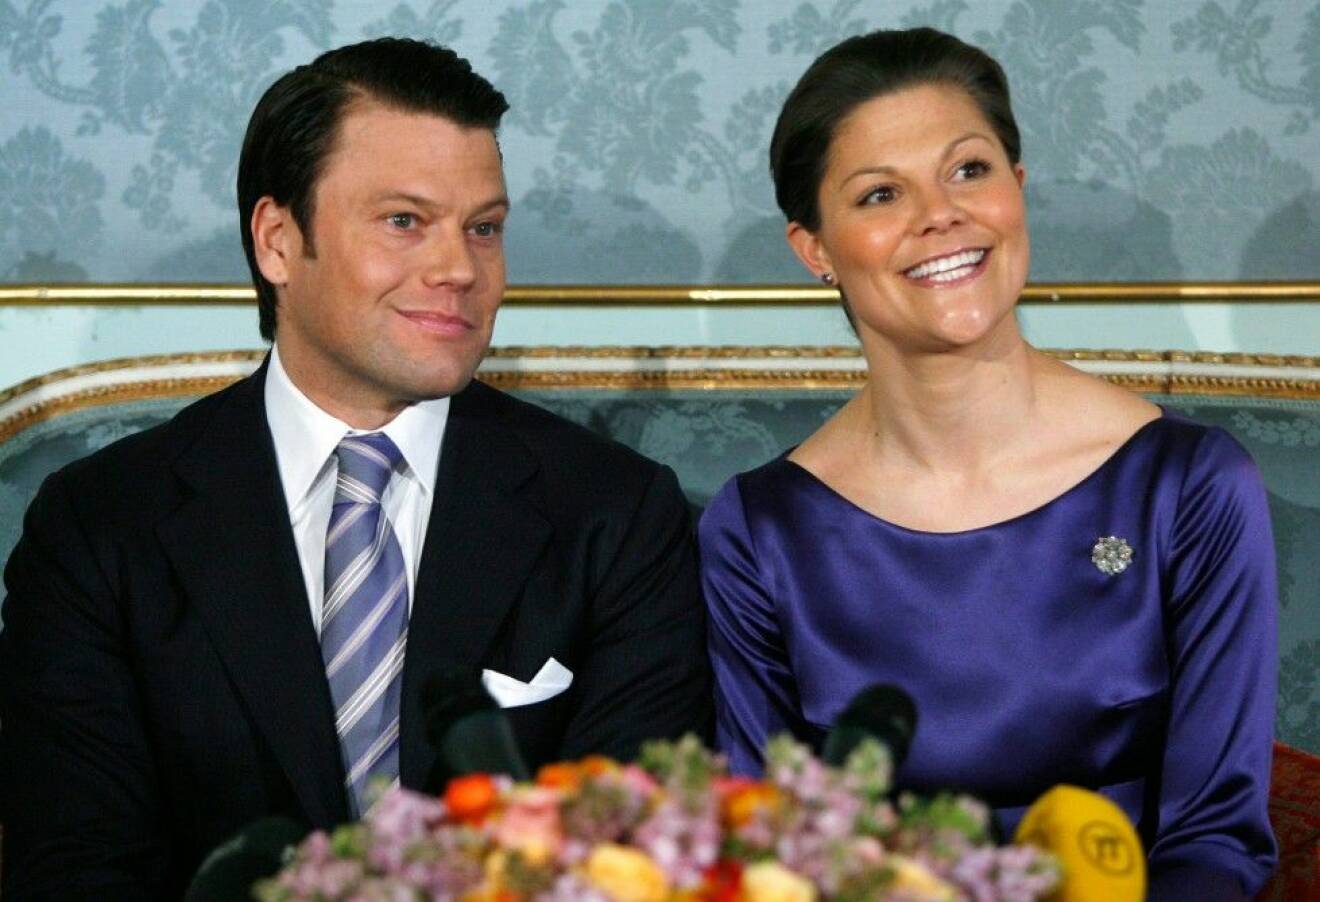 Sweden's Crown Princess Victoria and her fiance Westling talk to reporters during a news conference after their engagement was announced at the Royal Palace in Stockholm